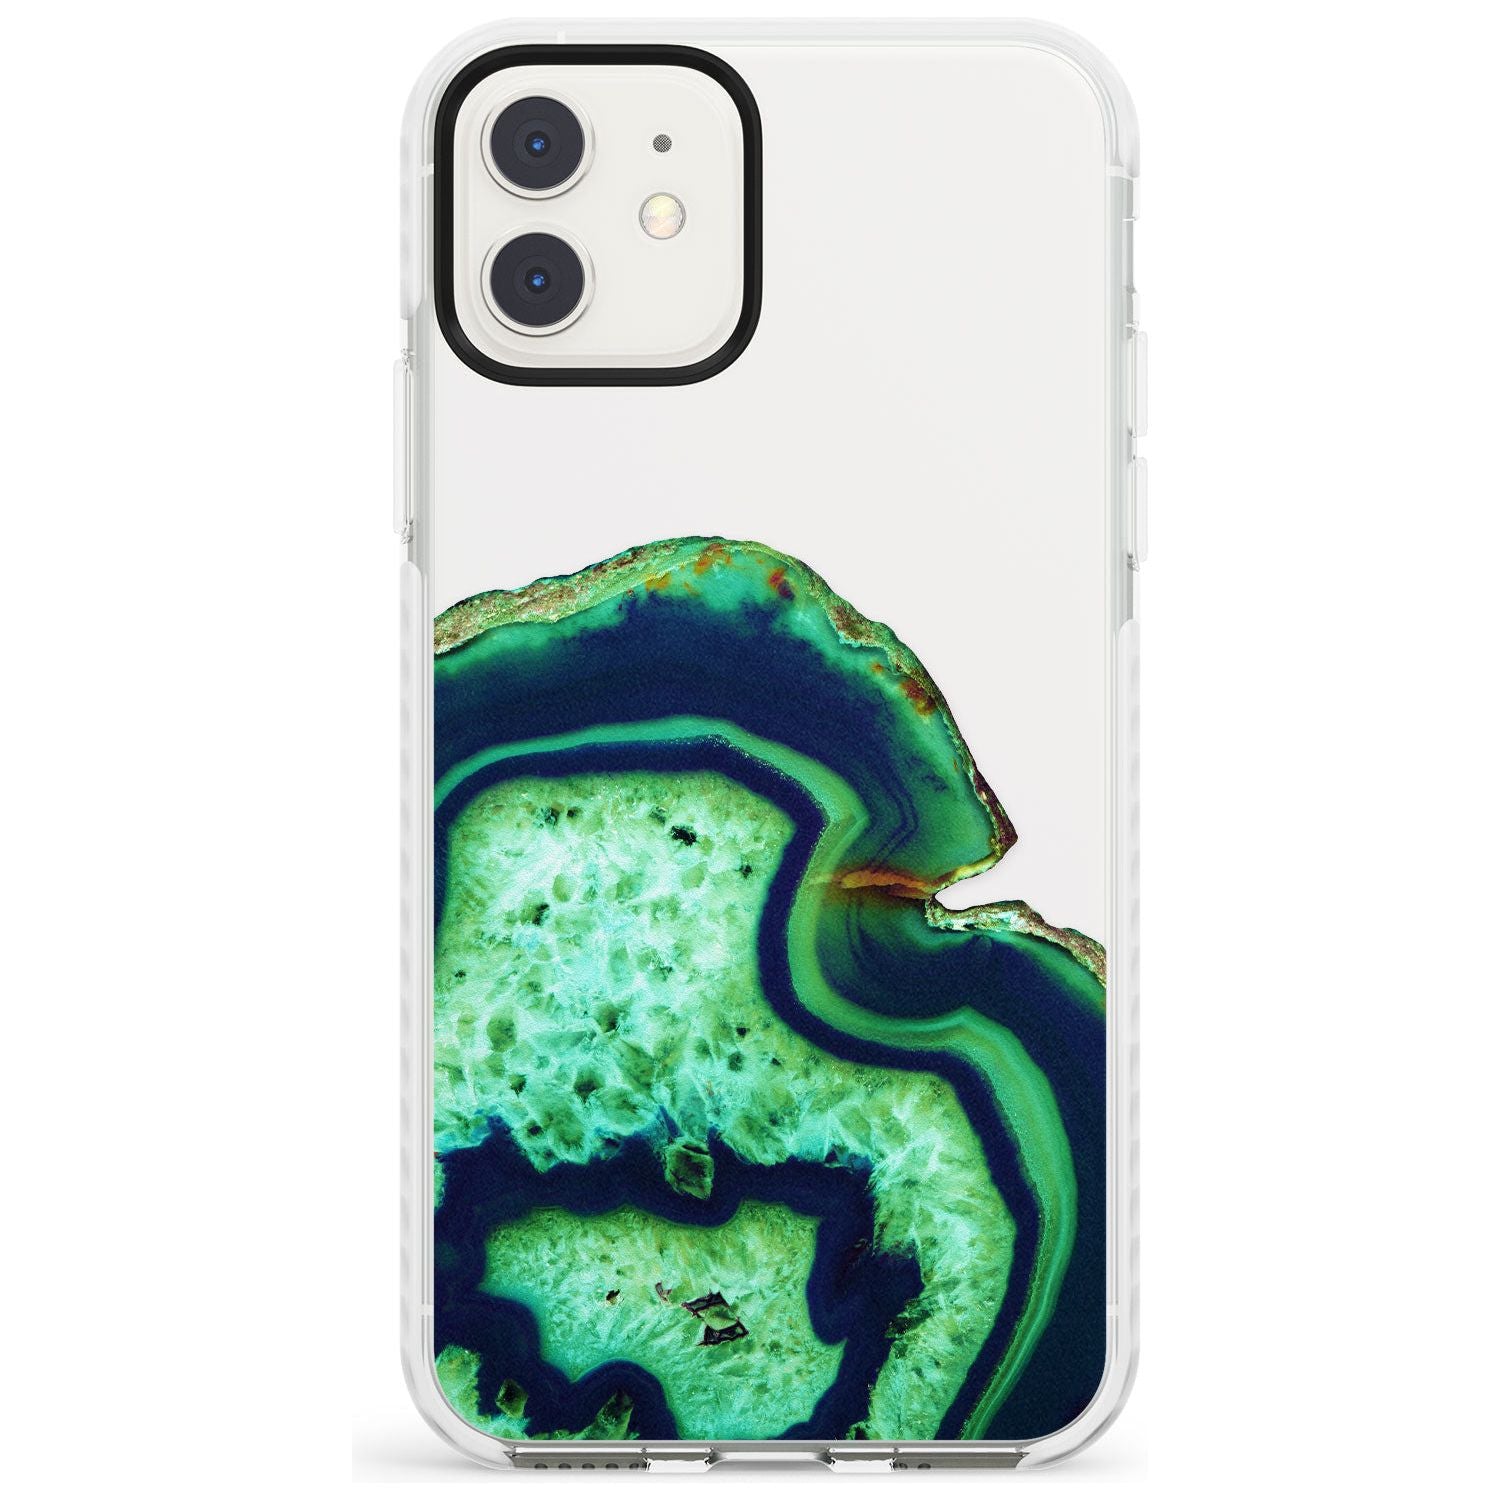 Neon Green & Blue Agate Crystal Transparent Design Impact Phone Case for iPhone 11